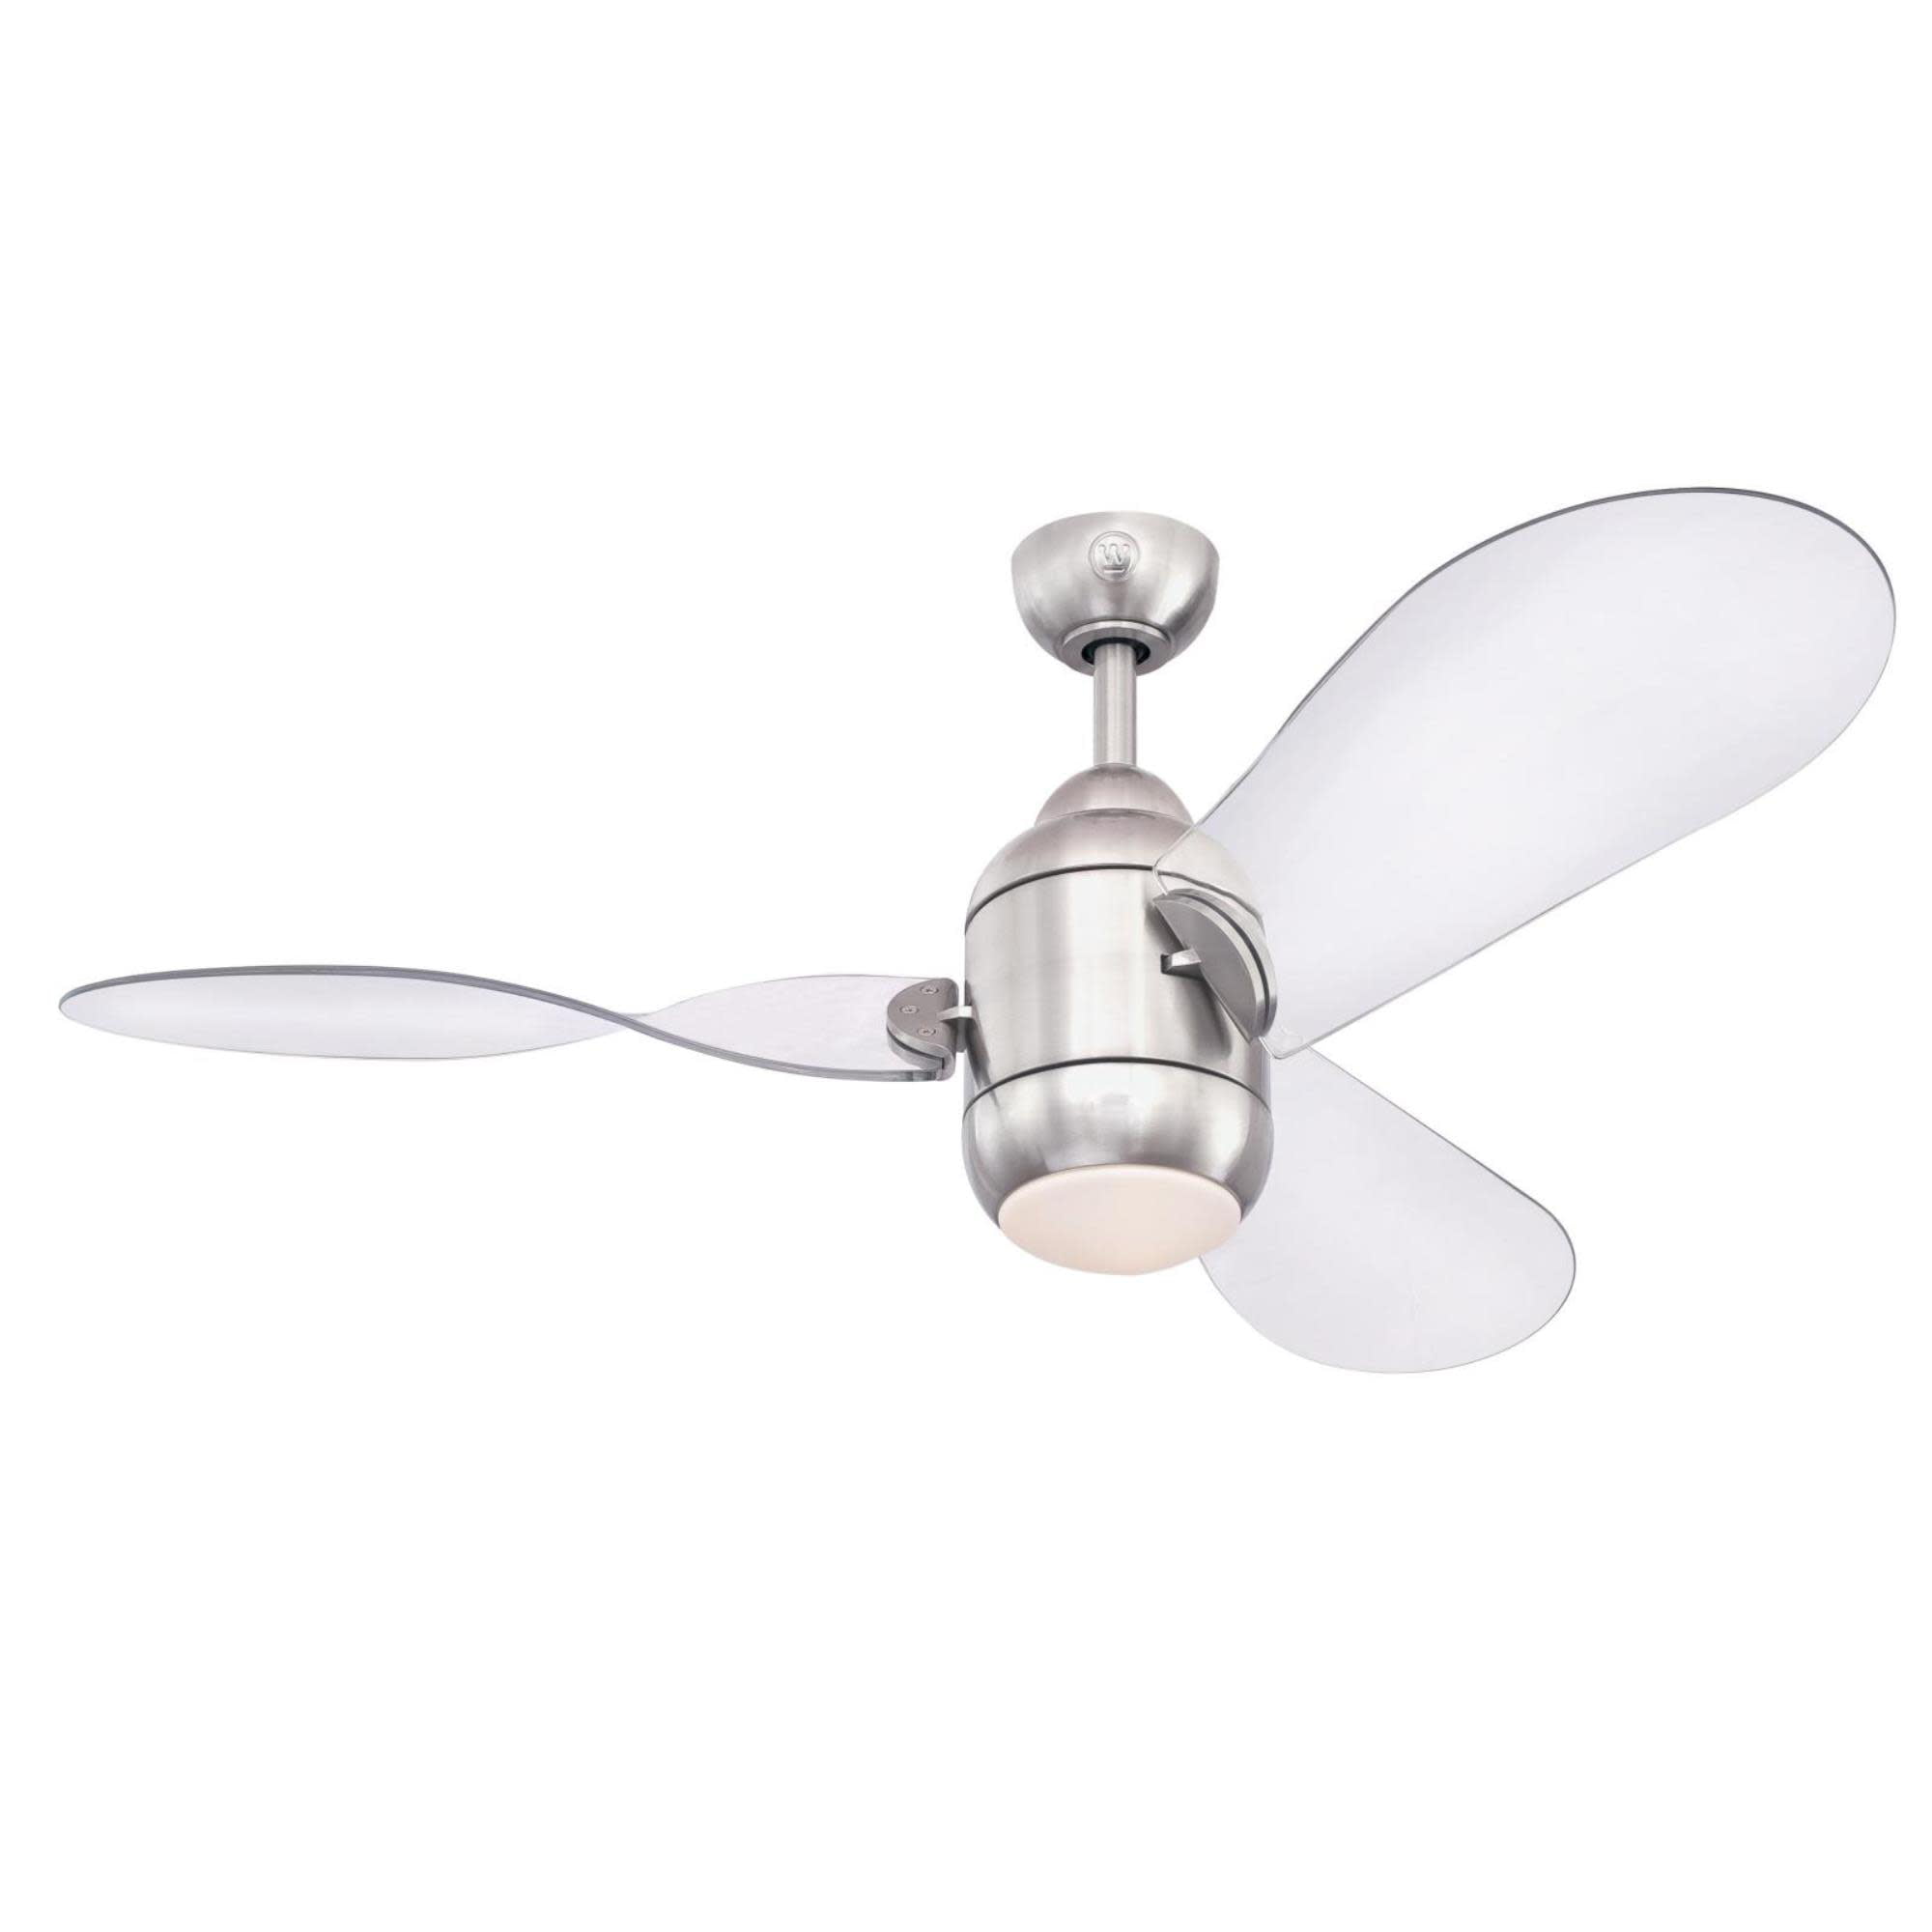 Blade Led Ceiling Fan Nickel, 26 9 In Black Industrial 3 Blades Ceiling Fan With Remote Control